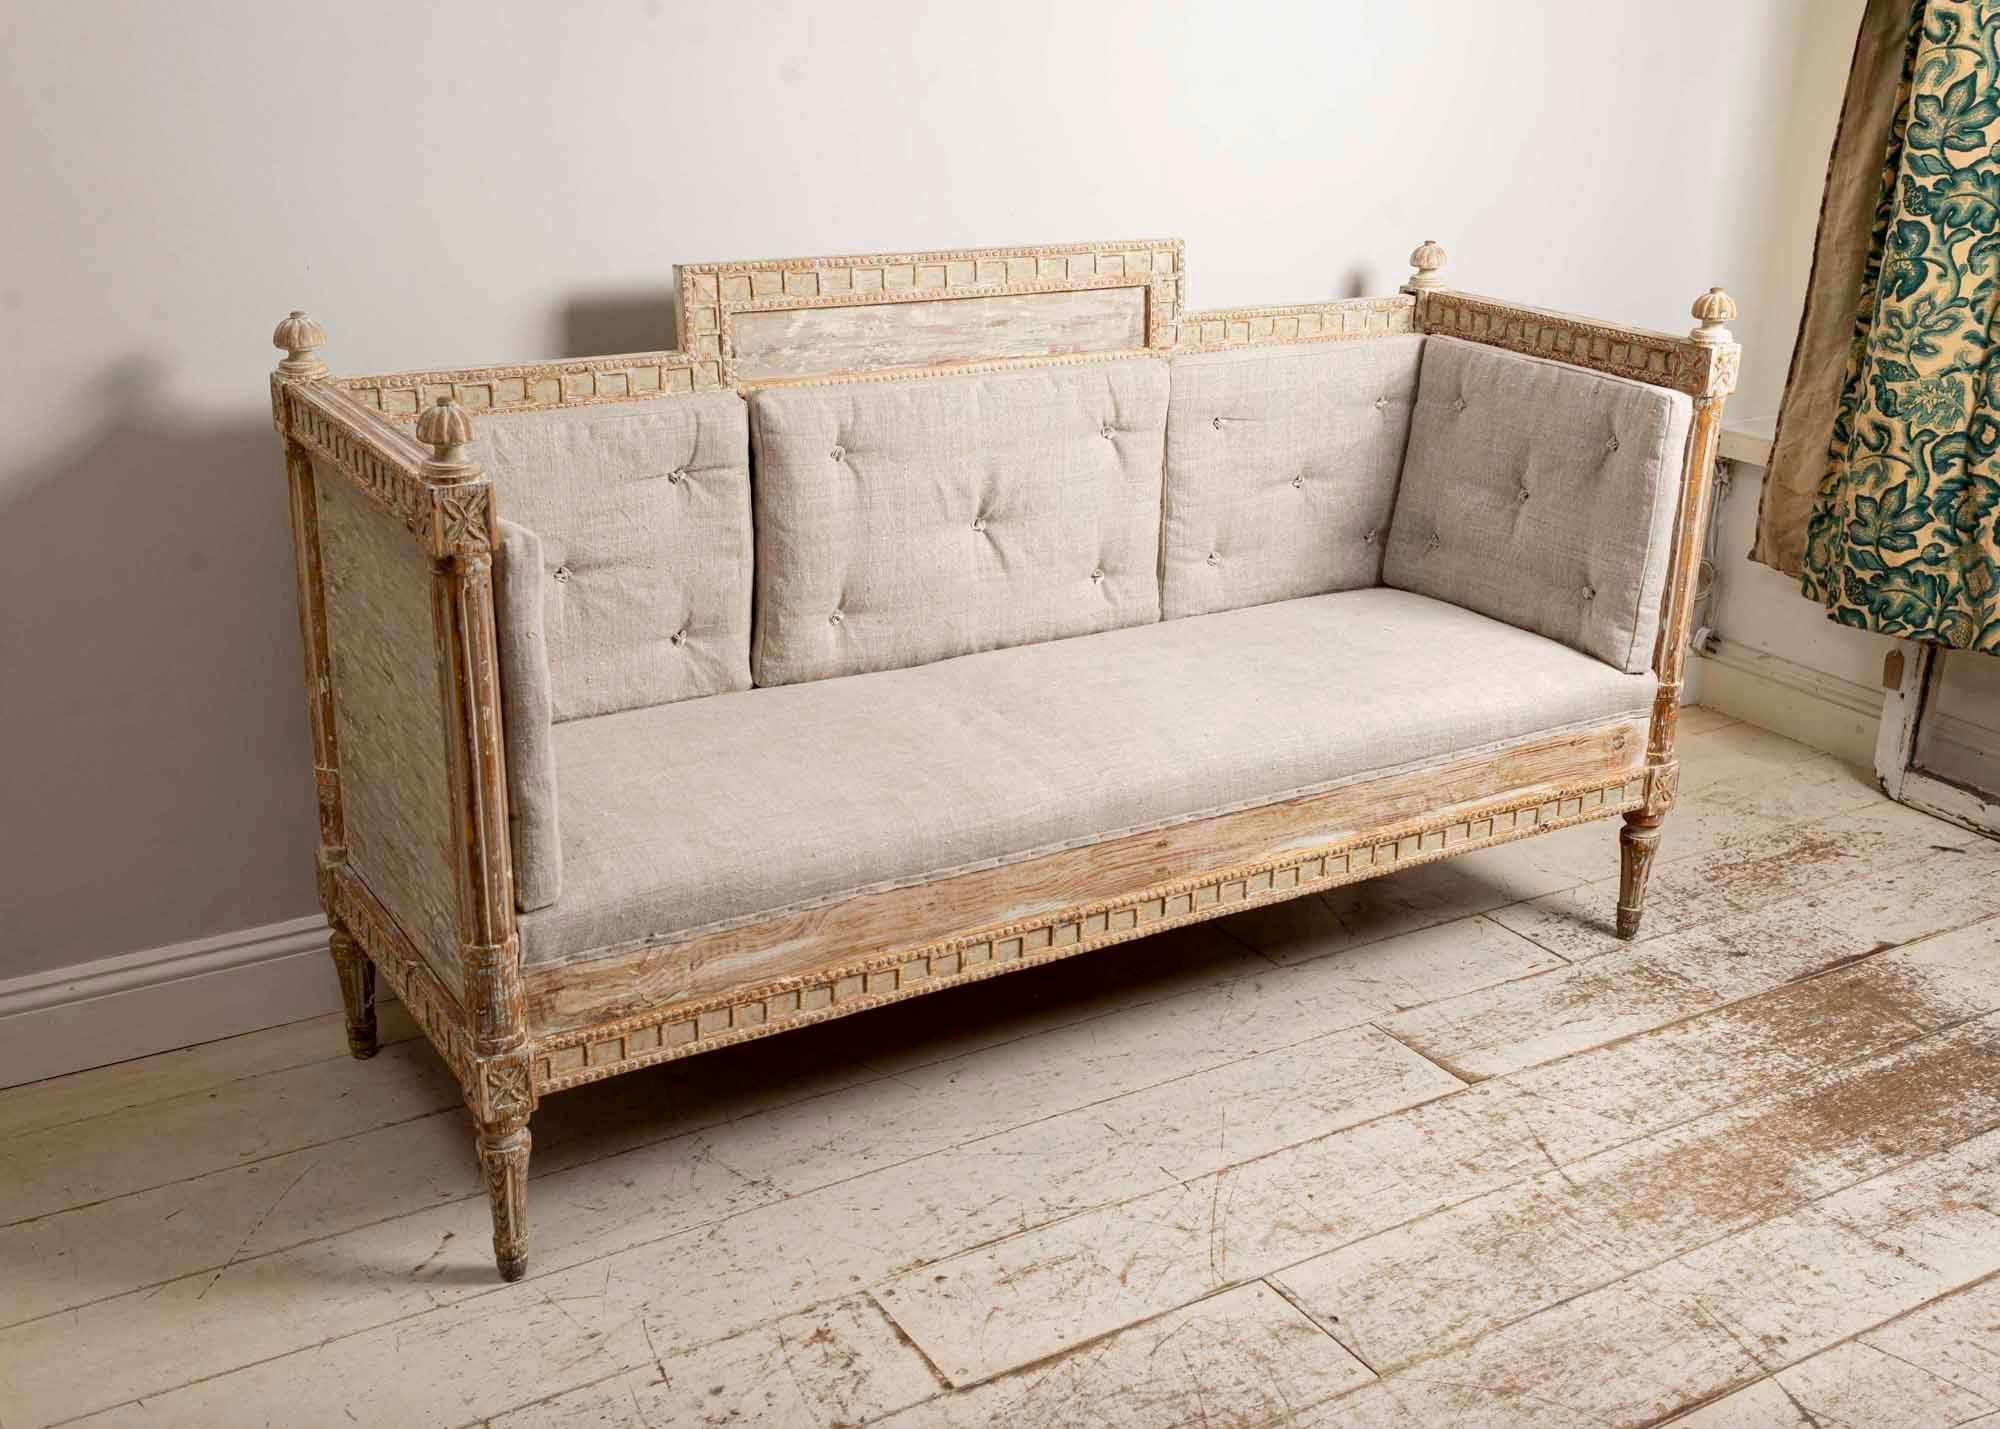 Early 19th century Gustavian high back sofa featuring unusual decorative detail. Reupholstered in a vintage French linen fabric. In very good condition.
 